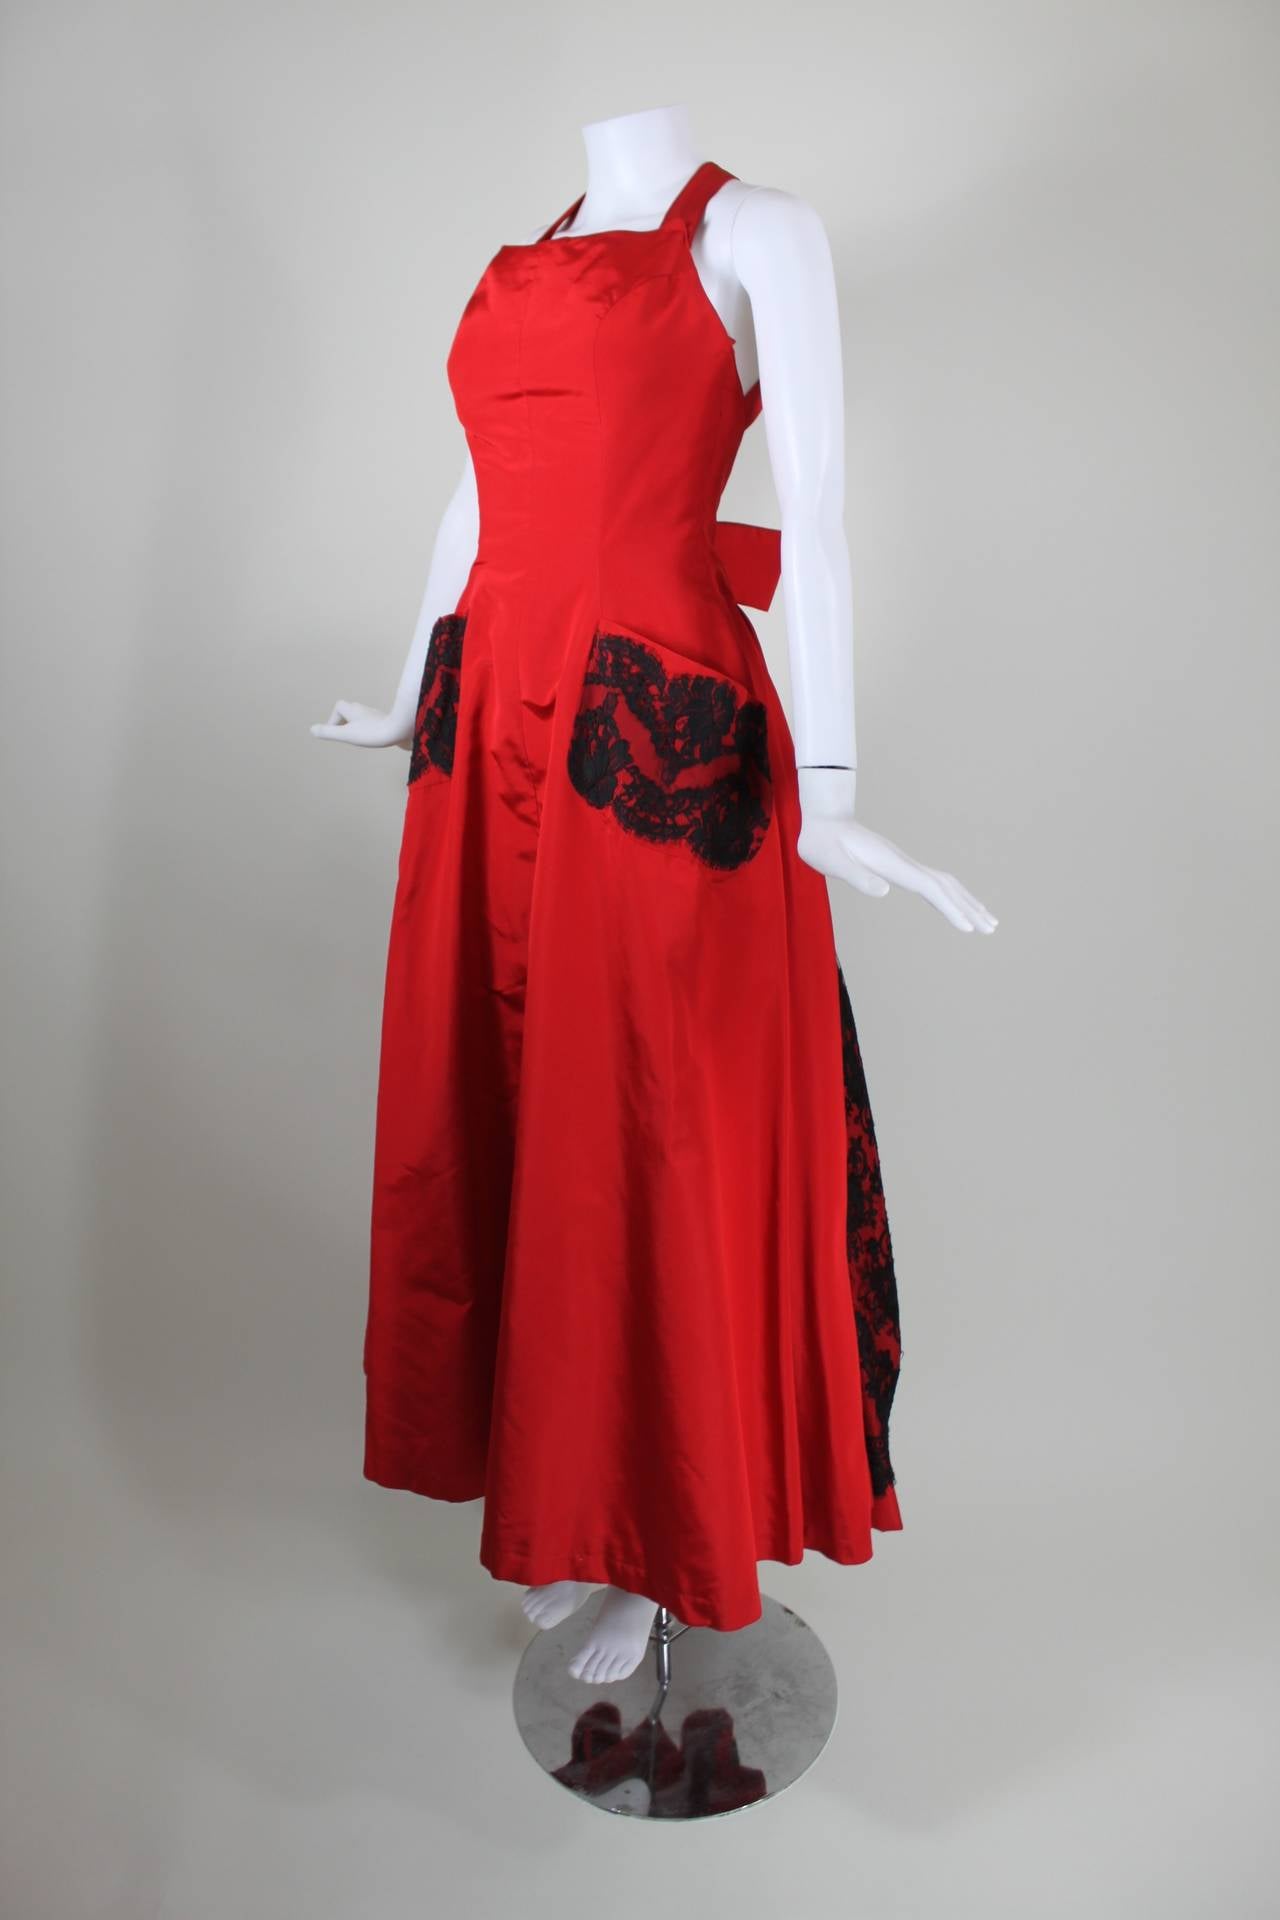 This is a gorgeous lipstick red two-piece pinafore gown from master of chic whimsy, Christian Lacroix.

Pinafore Measurements--
Bust: 32 inches
Waist: 26 inches
Hip: free

Ball Skirt Measurements--
Waist: 24 inches
Hip: free
Length, Waist